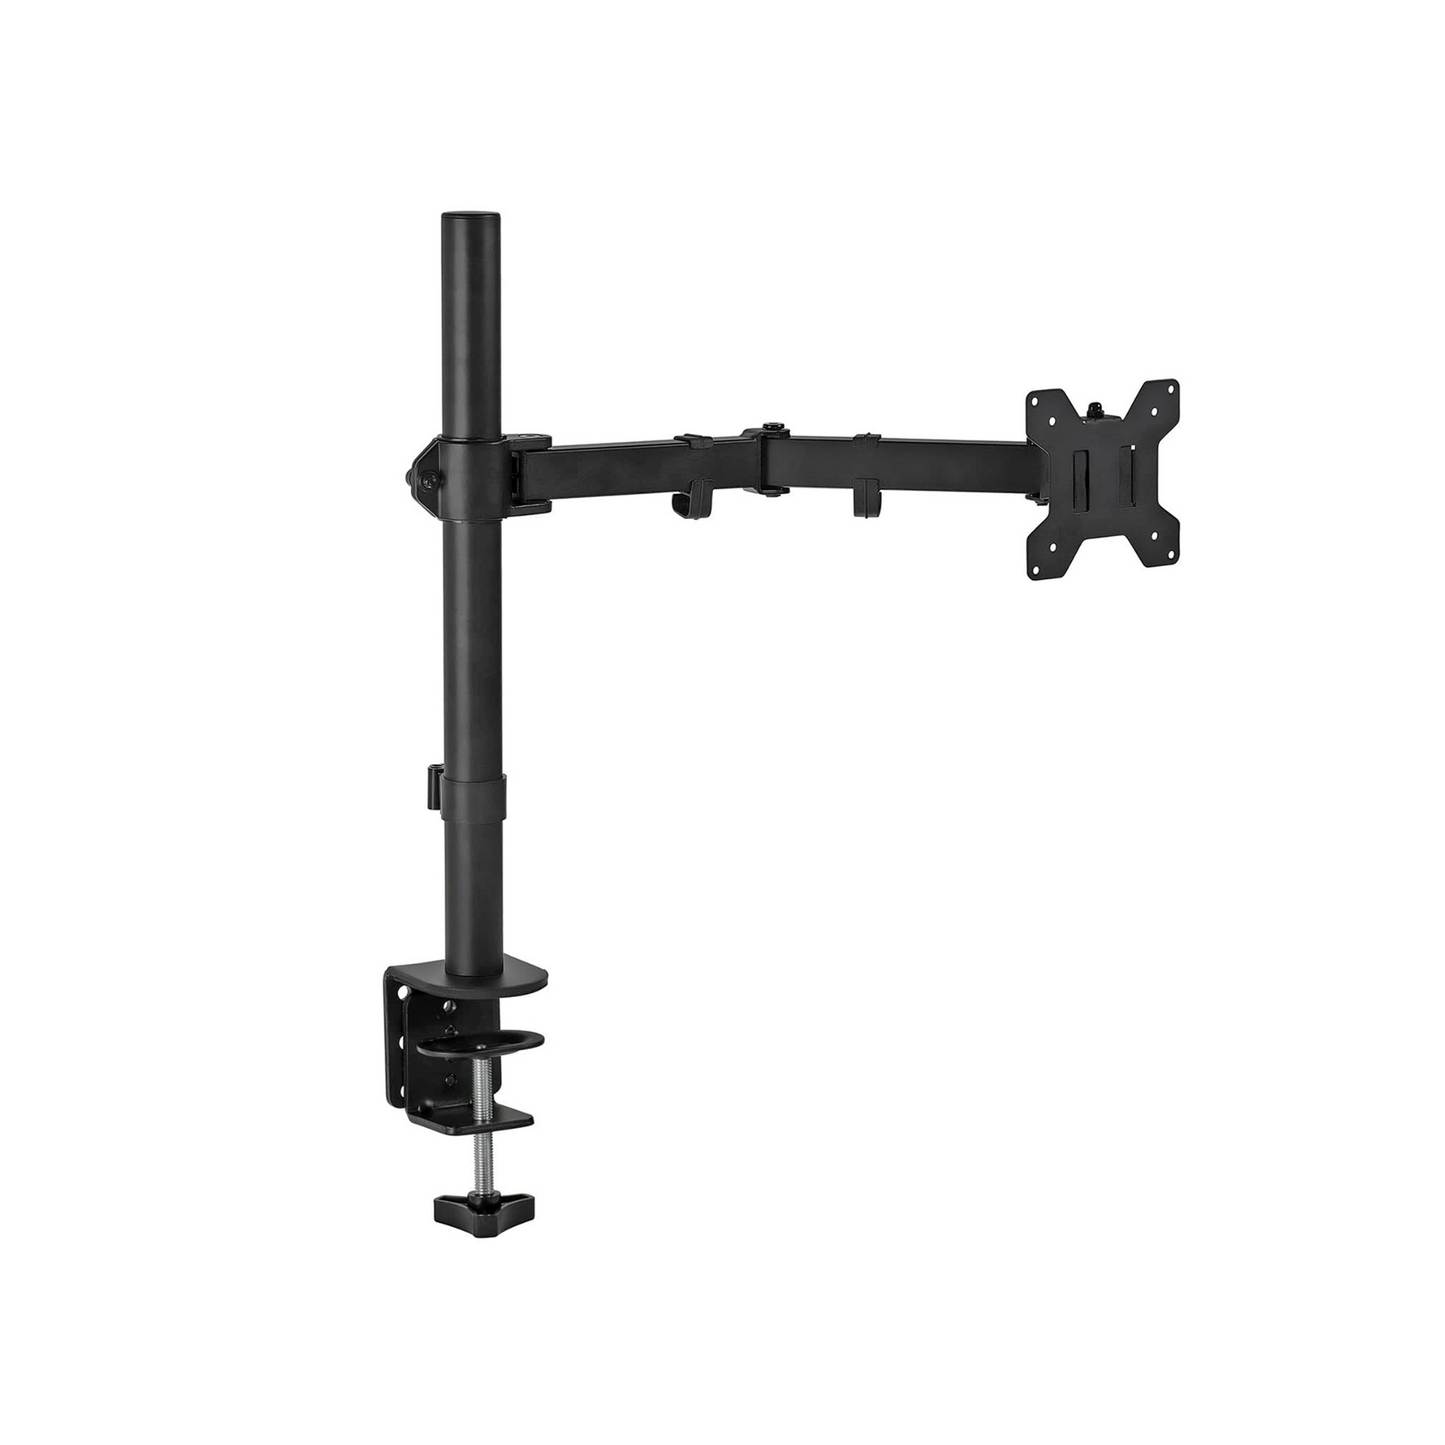 PALMAT 13-27” Single Monitor Mount, Height Adjustable Arm for LCD LED Screens, 2 Mounting Options, VESA Dimensions 75/100 Weight up to 9kg with Desk Clamp